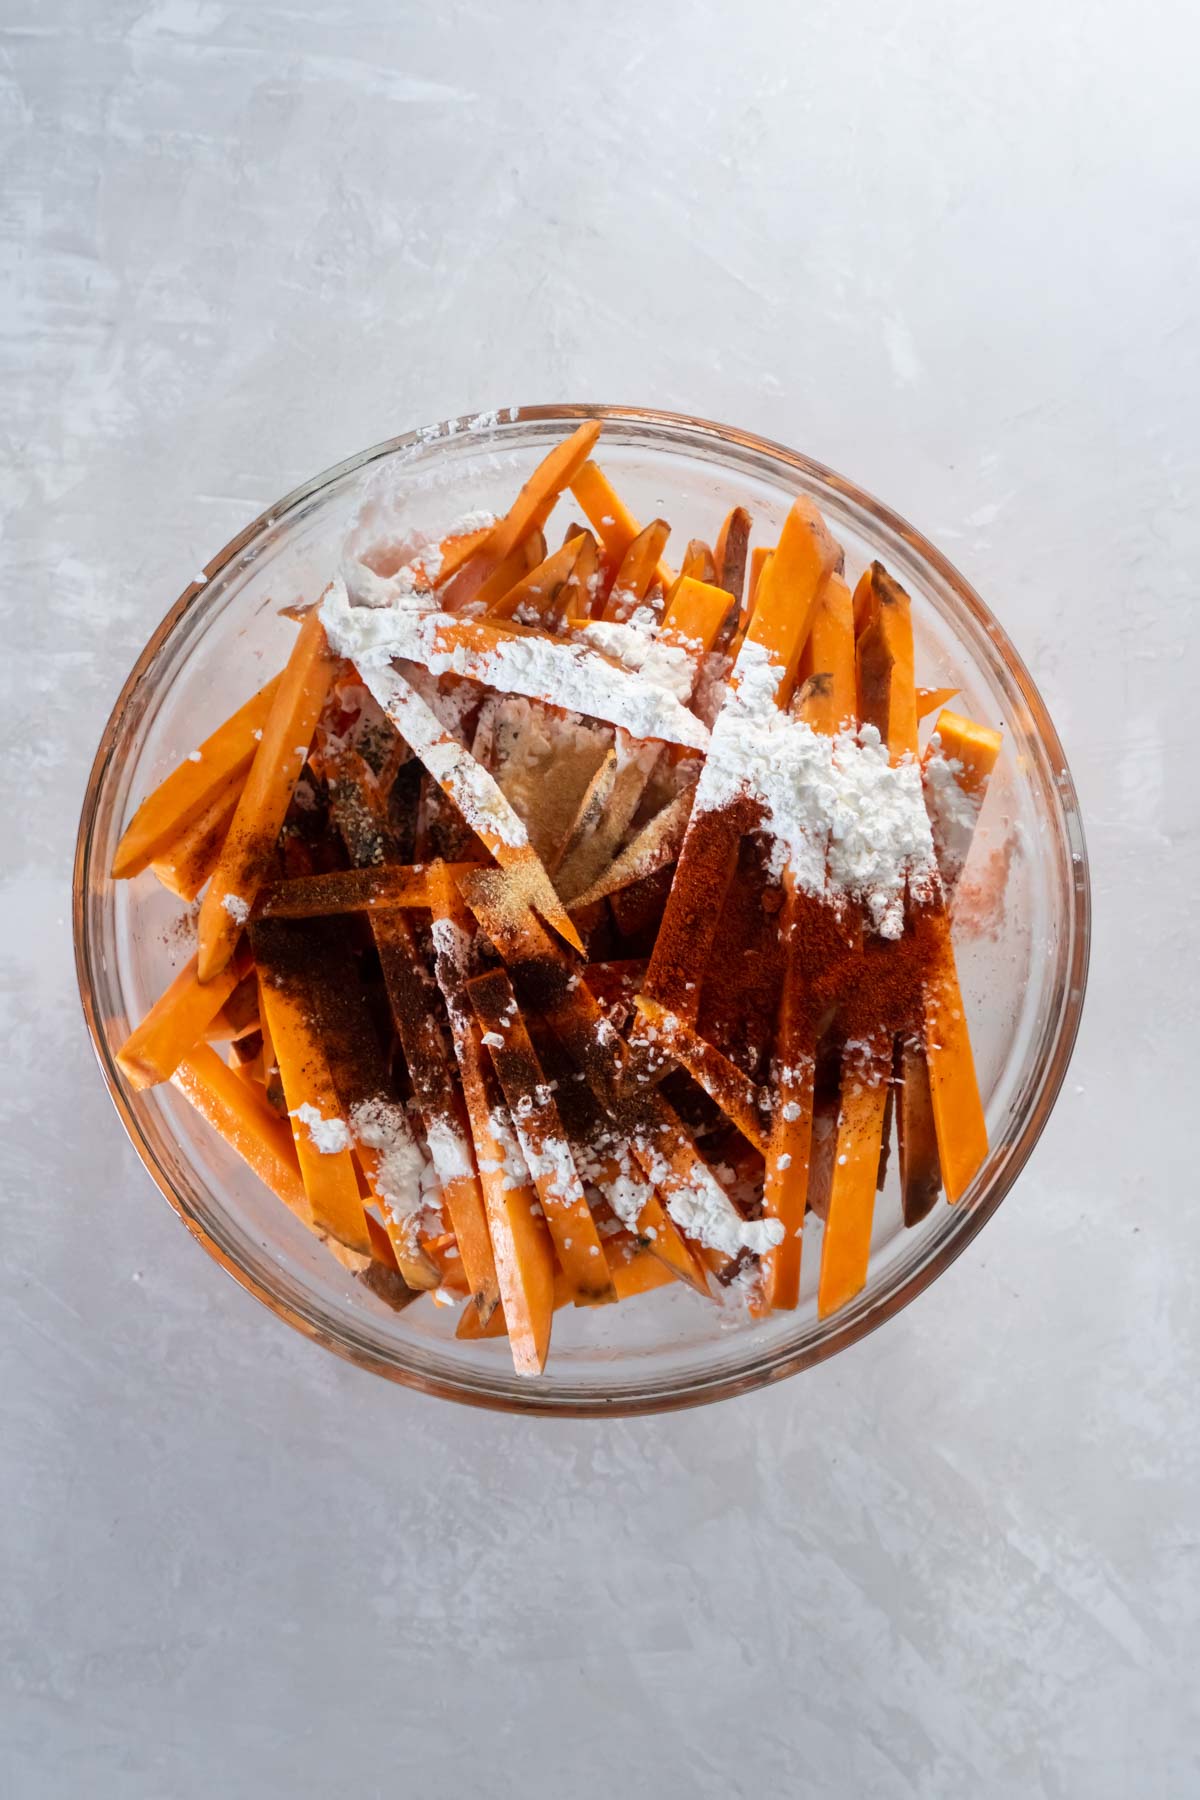 Cornstarch and seasonings sprinkled on cut sweet potato fries in mixing bowl.